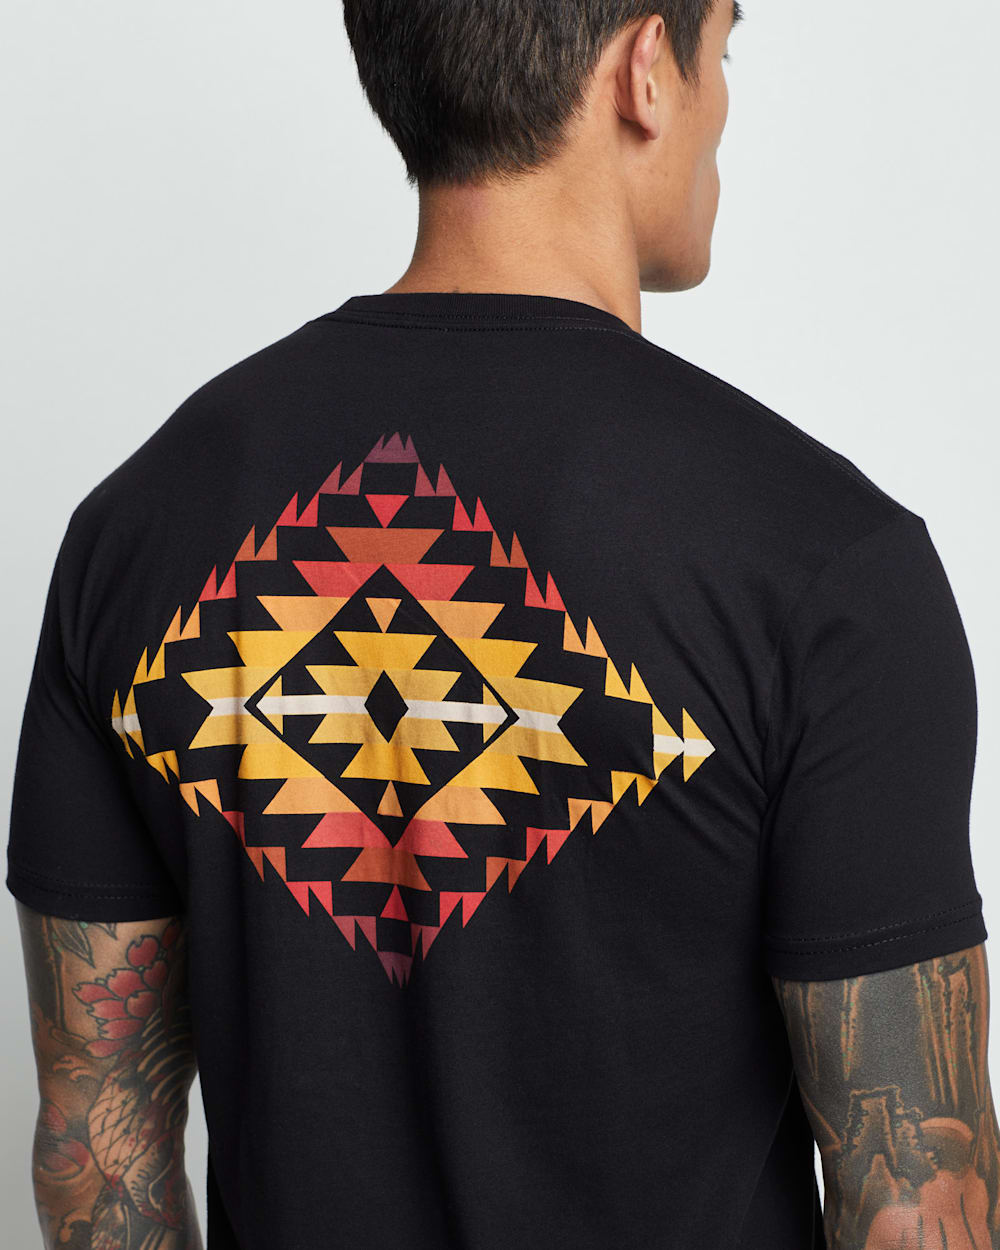 ALTERNATE VIEW OF MEN'S MISSION TRAILS LOGO GRAPHIC TEE IN BLACK/MULTI image number 5